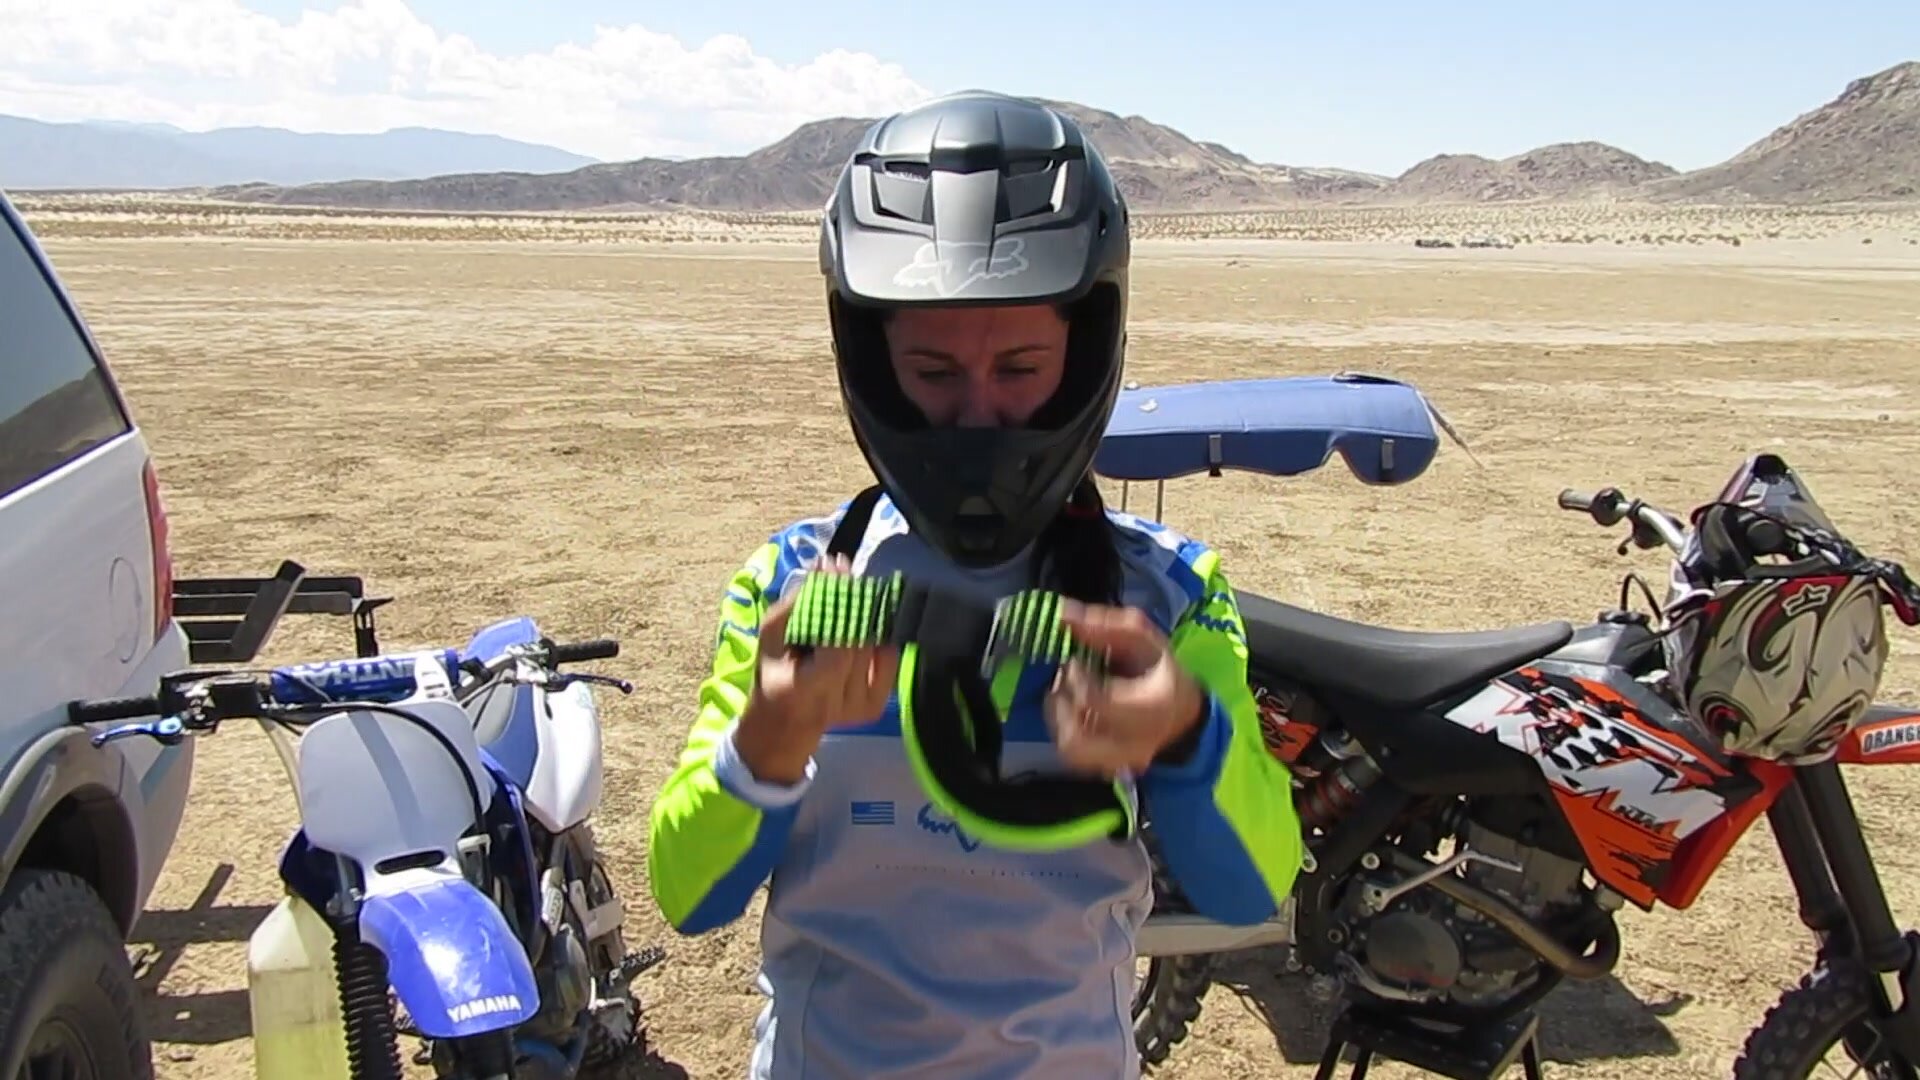 Dazzling housewife riding motorcycle stops in the desert with partner to have oral sexual intercourse photo